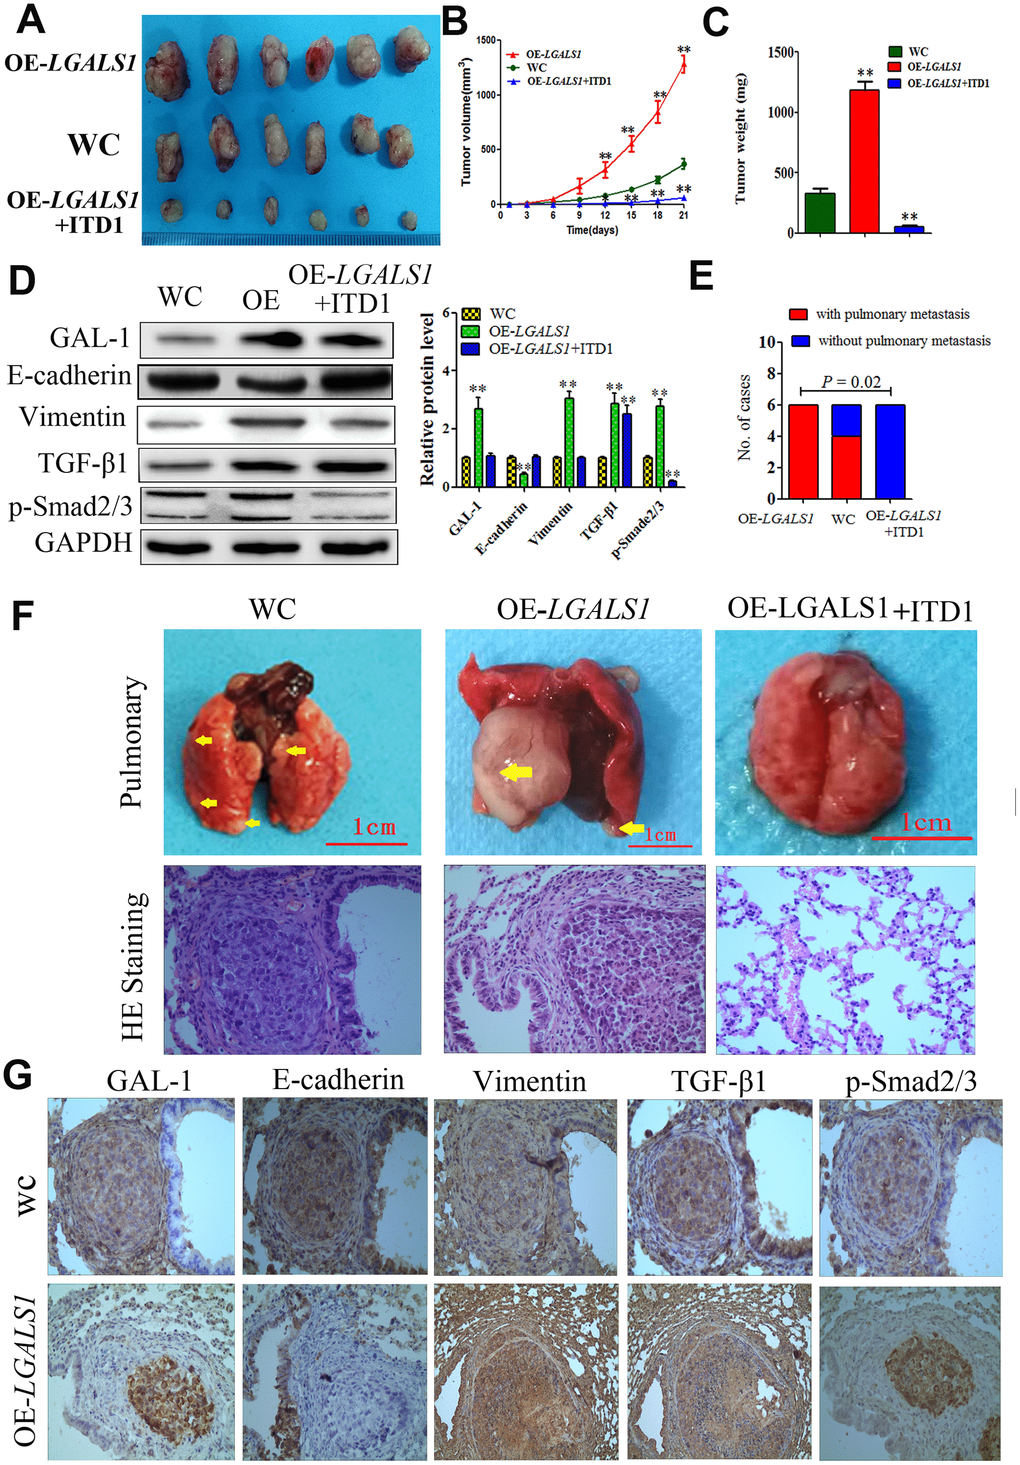 GAL-1/ LGALS1 promotes GC cell metastasis in vivo through the TGF-β/Smad signaling pathway. (A) OE-LGALS1 induced MGC-803 to form subcutaneous xenograft tumors with larger volumes (B) and weighs (C) (expressed as the mean ± SE). * P PD) OE-LGALS1 increased the levels of TGF-β1 and p-Smad2/3, and induced EMT in the subcutaneous xenograft tumor, ITD1 could inhibit this effect. Metastases were frequent in the (E). (F) Representative images of metastasis (yellow arrows) in the lungs at 50 days after inoculation, and representative images of H&E staining. Original magnification: ×400. (G) Immunostaining showing GAL-1, E-cadherin, vimentin, TGF-β1 and p-Smad2/3 levels in pulmonary metastases. Magnification: ×400.